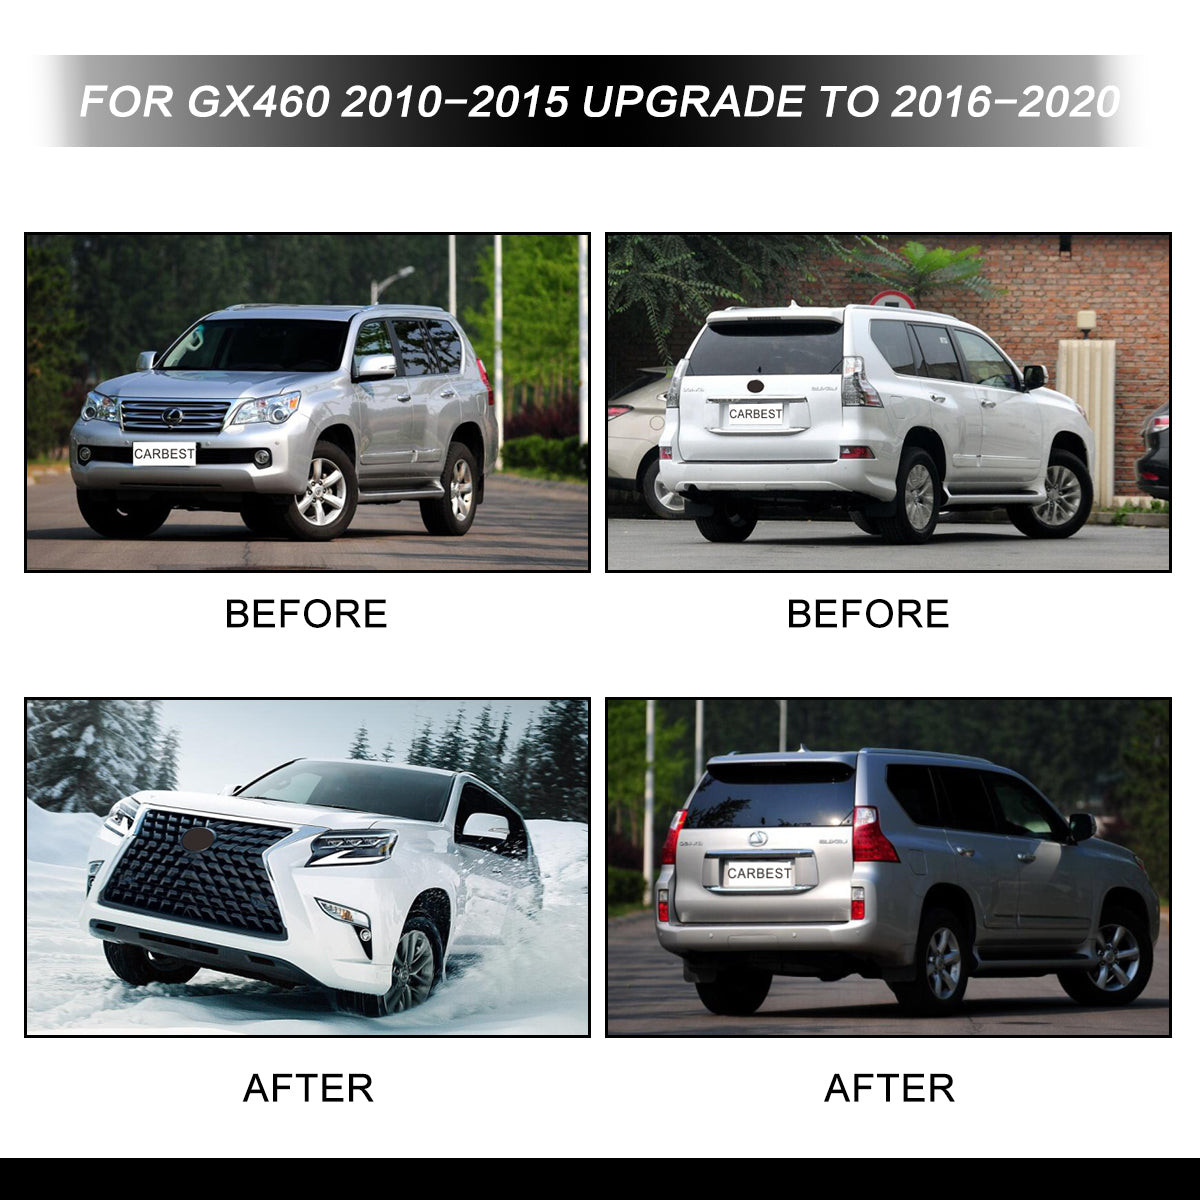 FOR GX460 2010-2015 UPGRADE TO 2016-2020